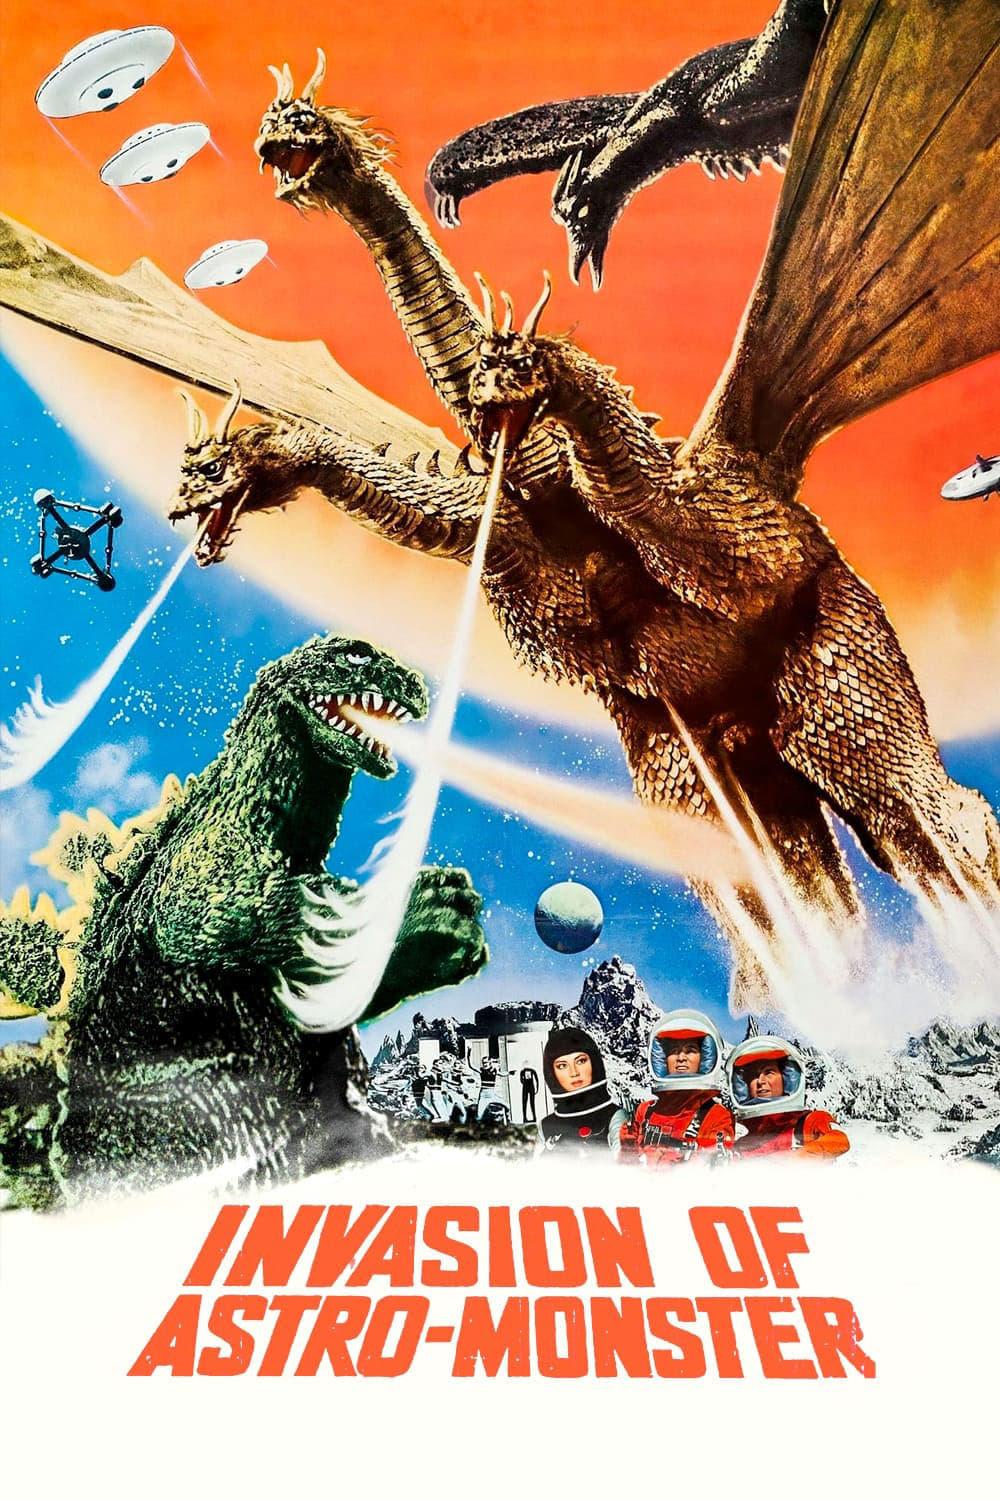 Invasion of Astro-Monster poster